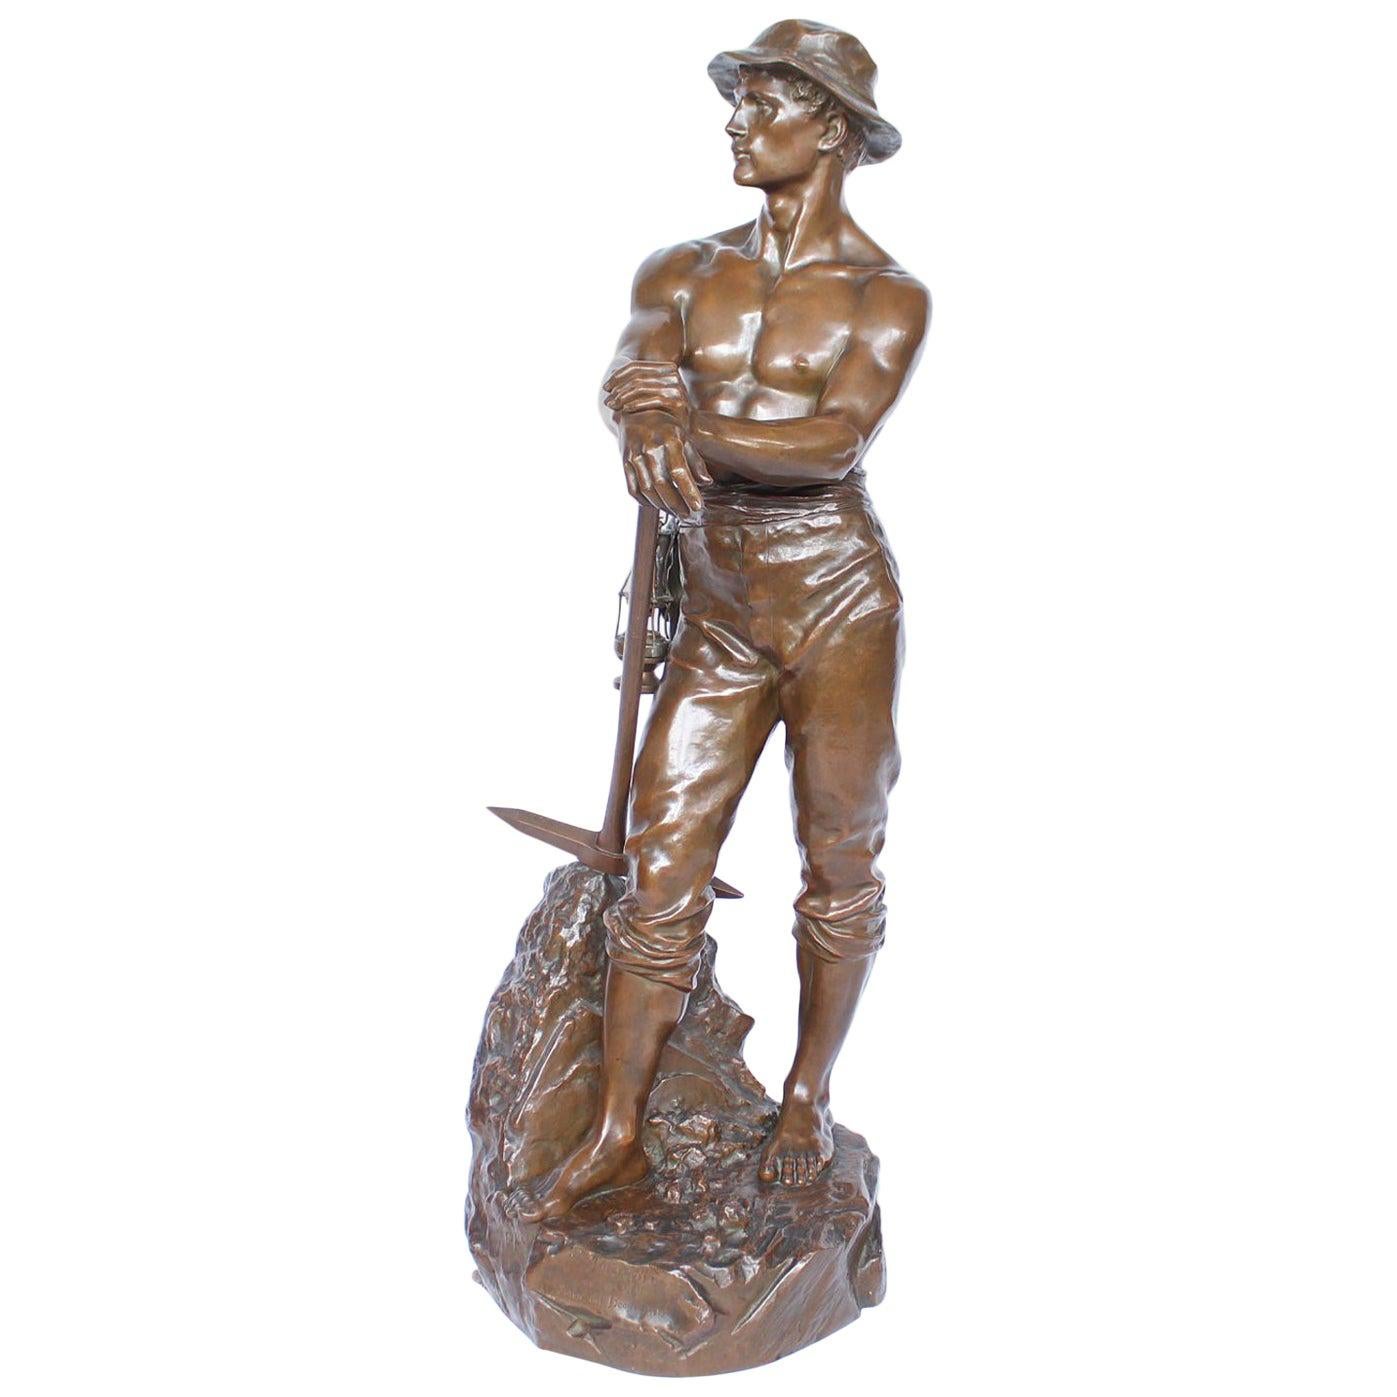 19th Century 1 Metre Tall Bronze Sculpture of a Bare Chested Man, France 1890